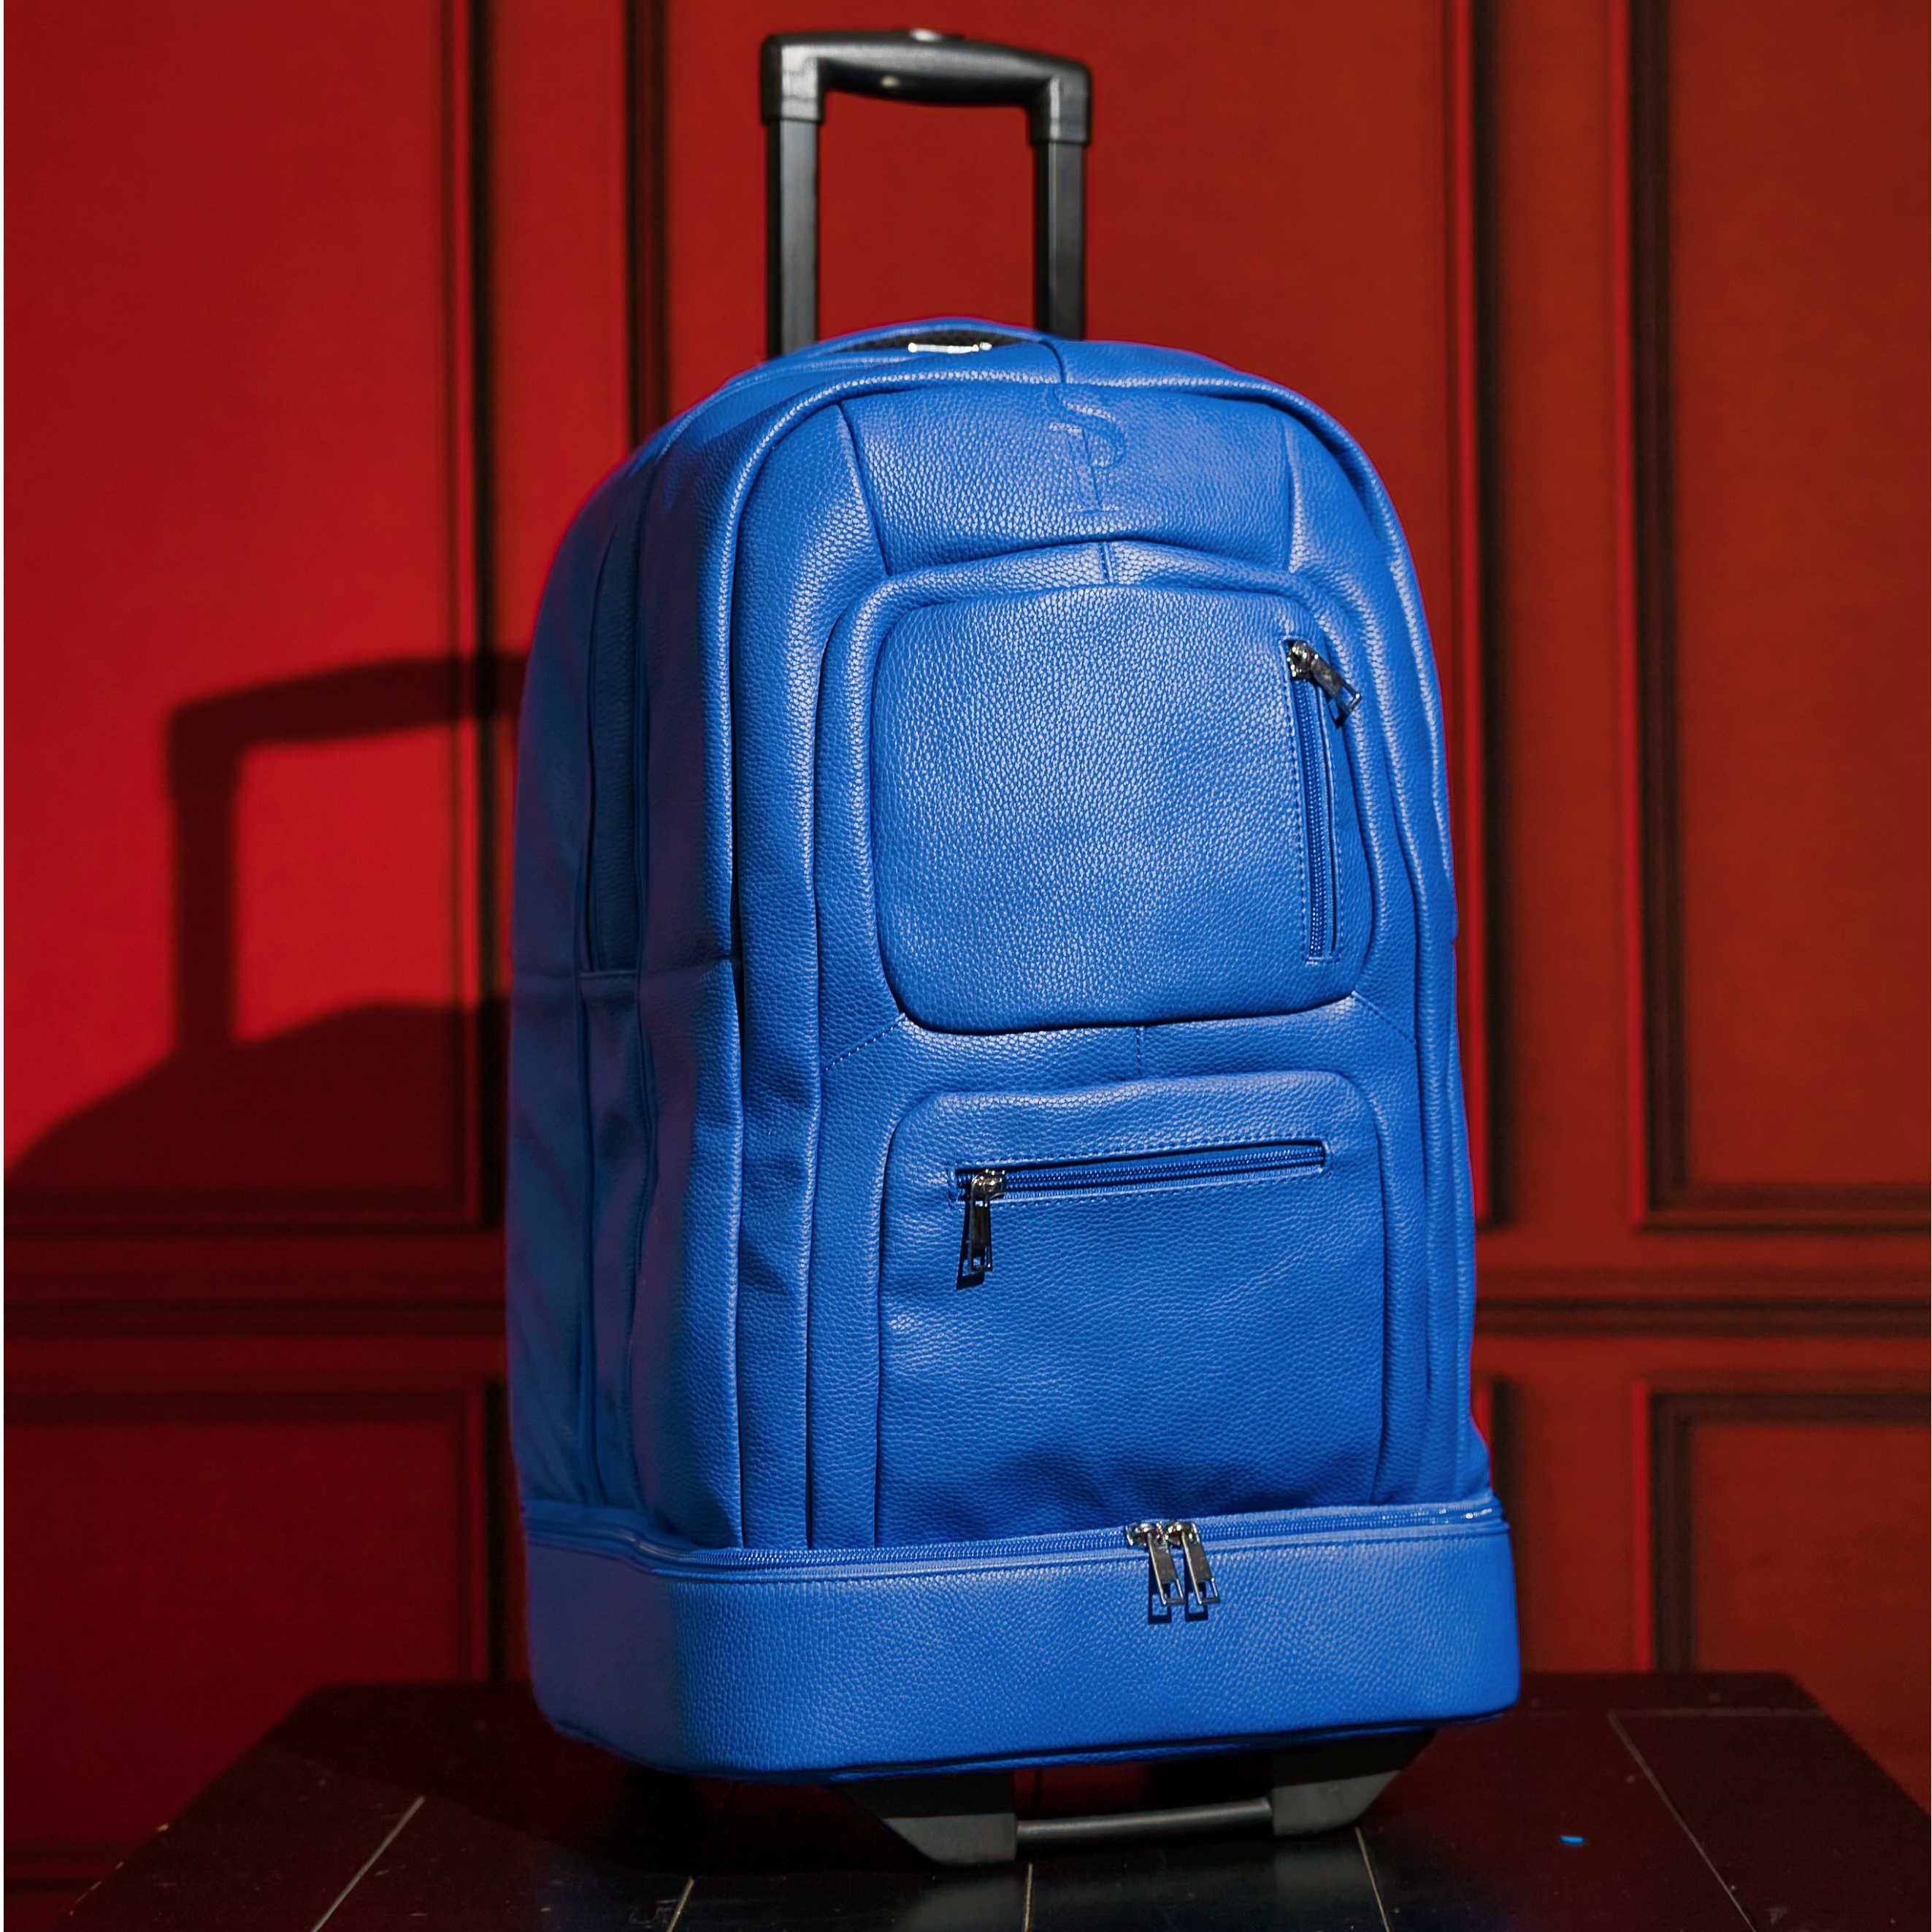 Royal Blue Tumbled Leather Roller Bag (Only 200 Made) - Sole Premise